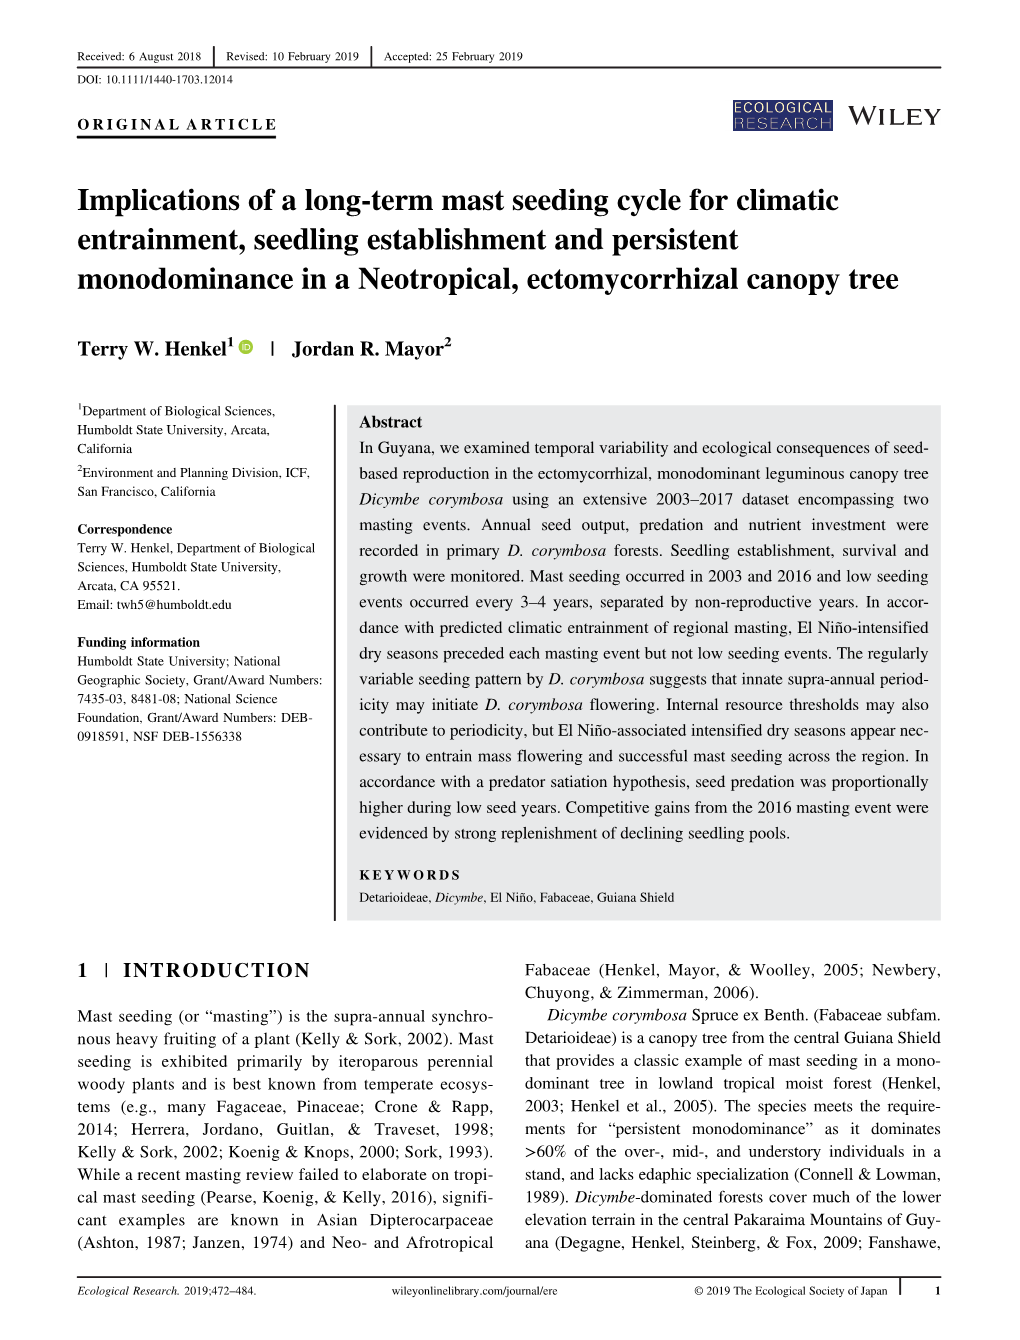 Implications of a Long-Term Mast Seeding Cycle for Climatic